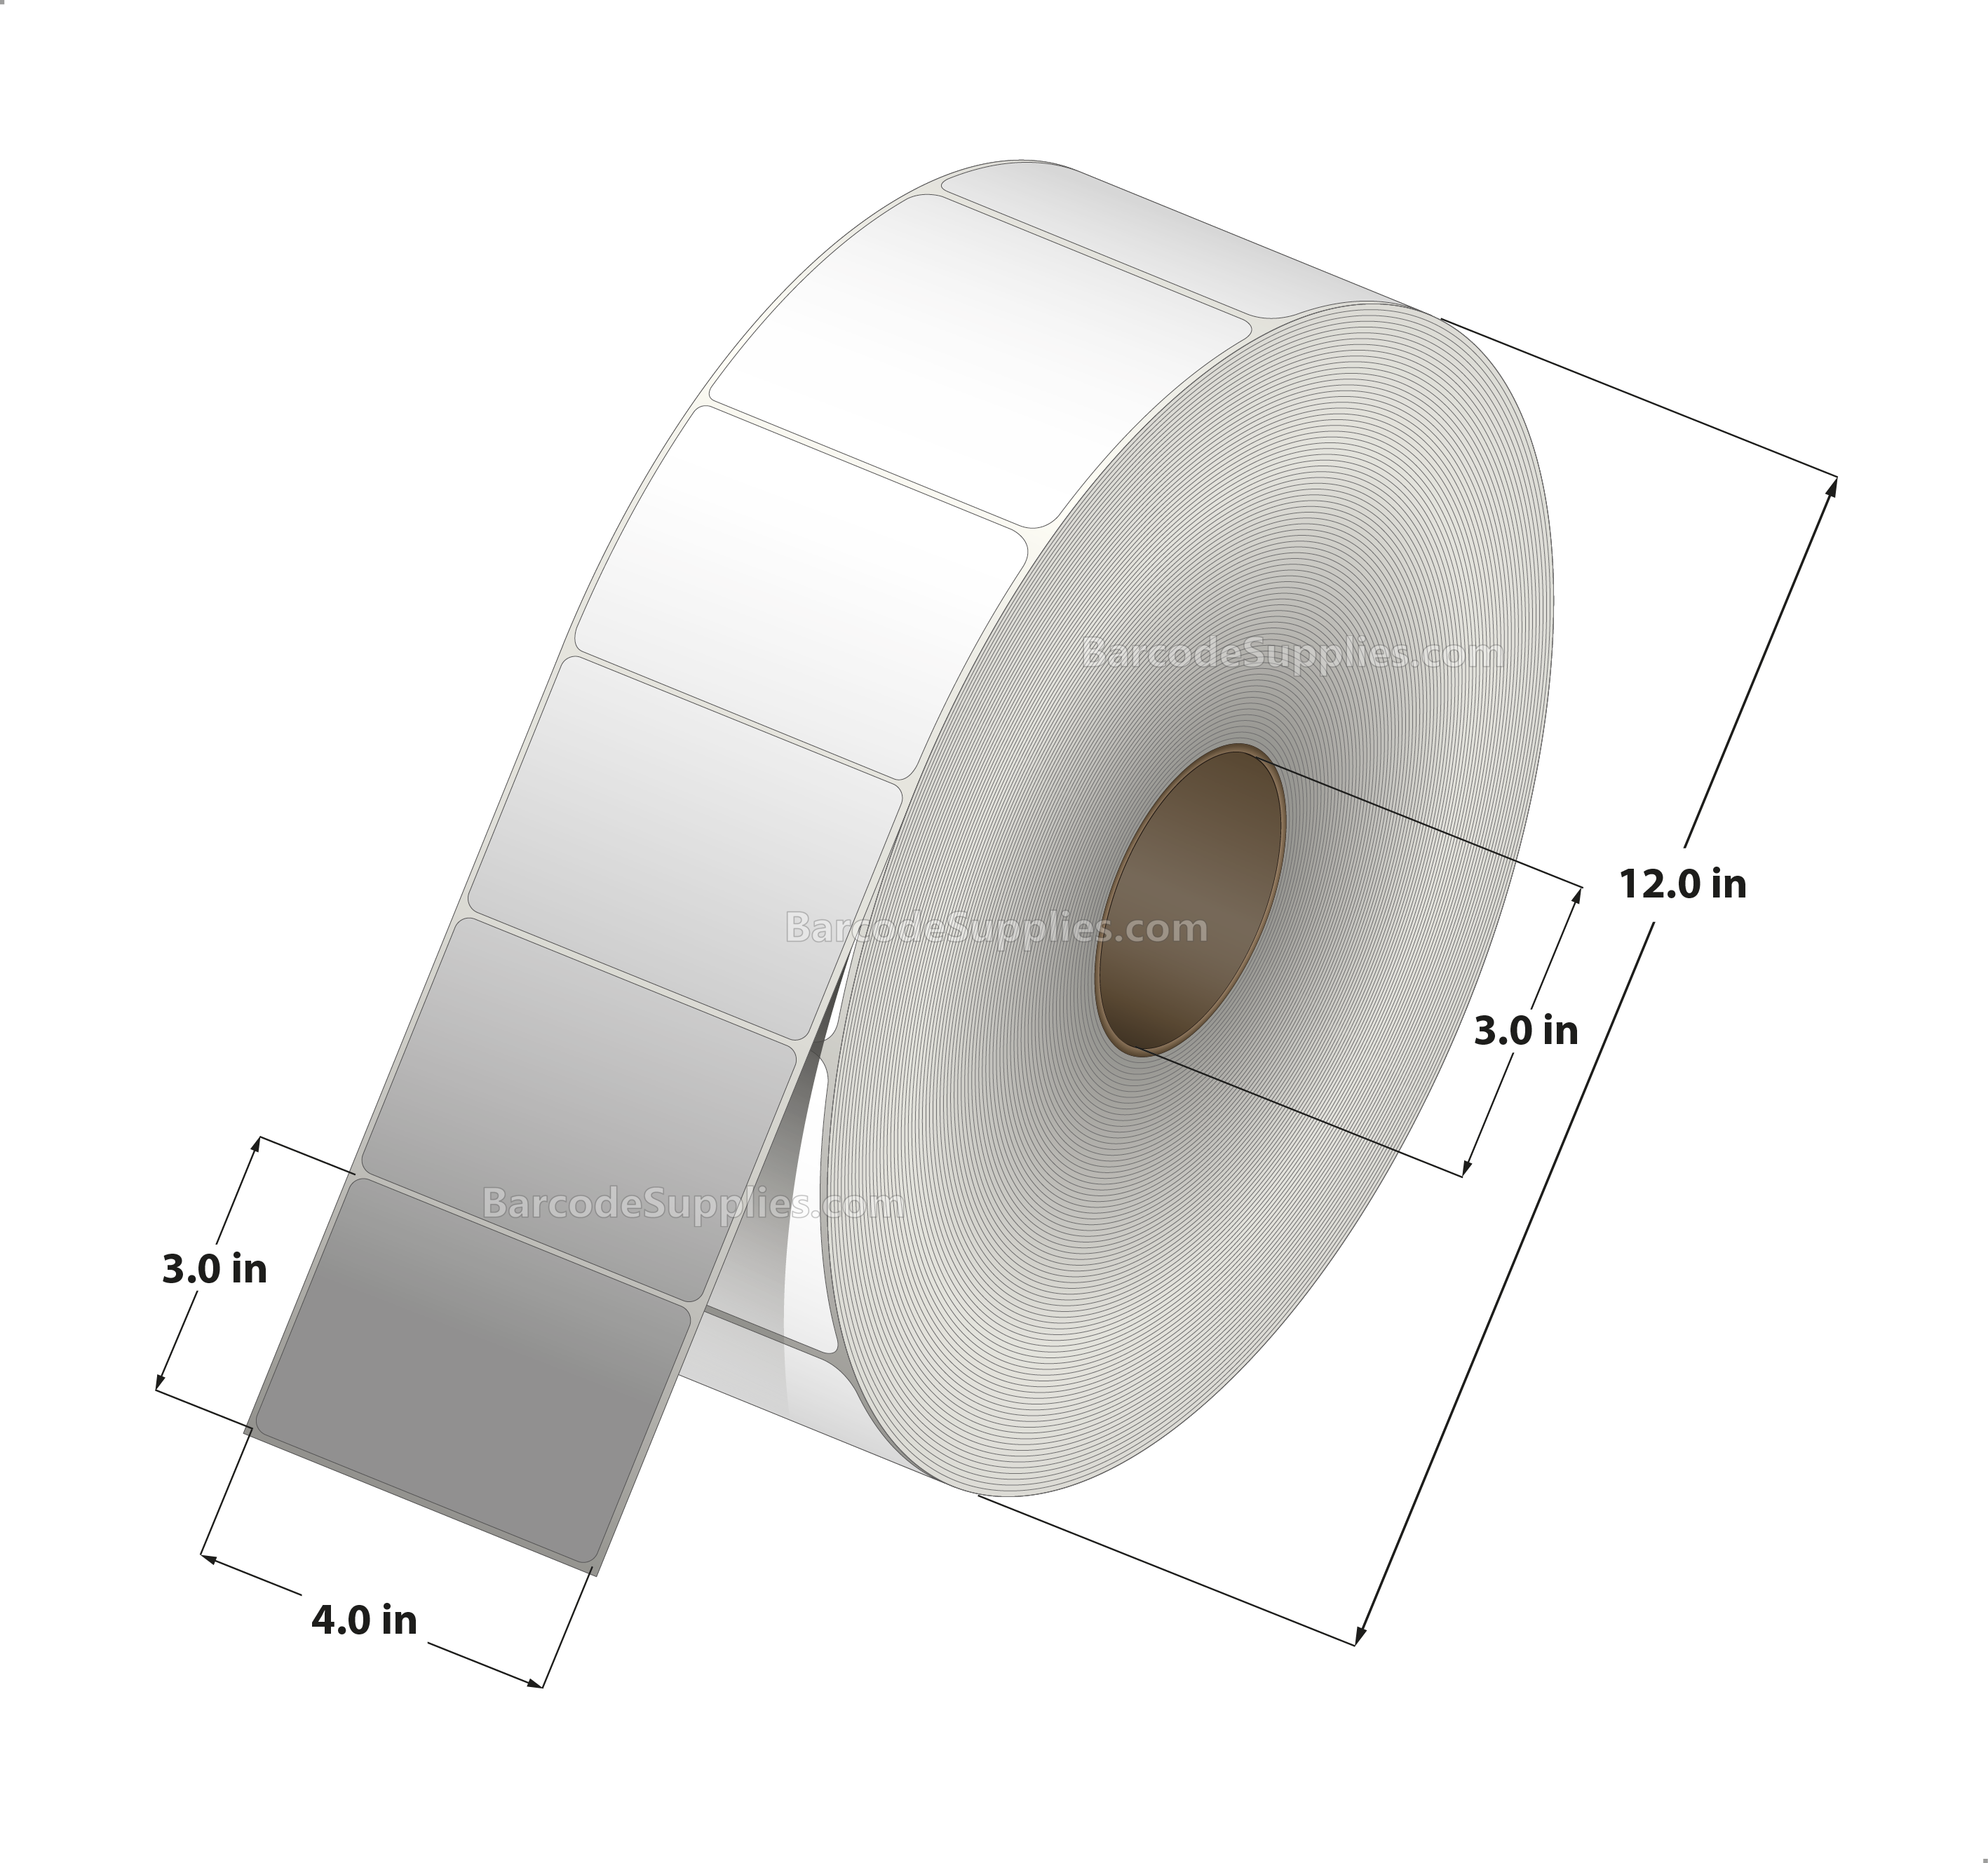 4 x 3 Thermal Transfer White Labels With Permanent Adhesive - No Perforation - 5164 Labels Per Roll - Carton Of 3 Rolls - 15492 Labels Total - MPN: RT-4-3-5164-NP